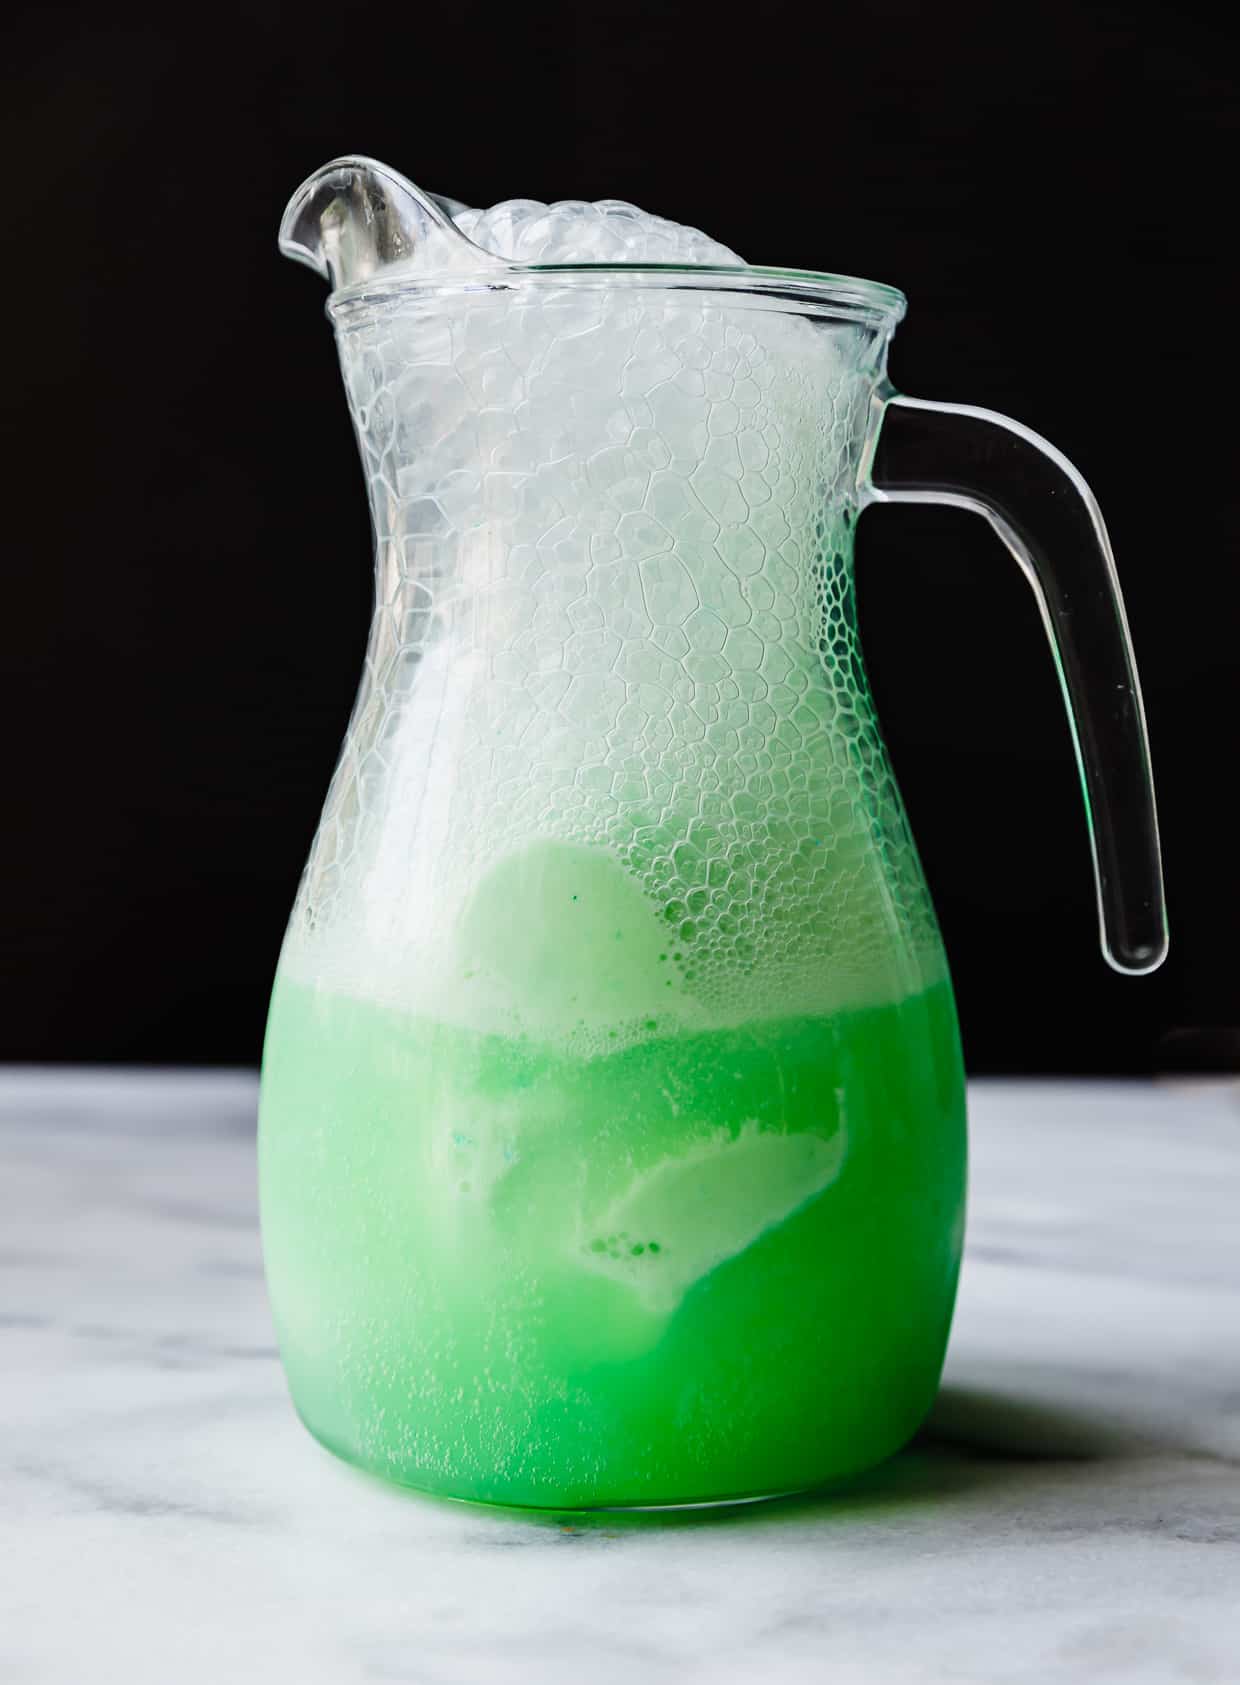 A glass pitcher filled with green Polyjuice Potion.